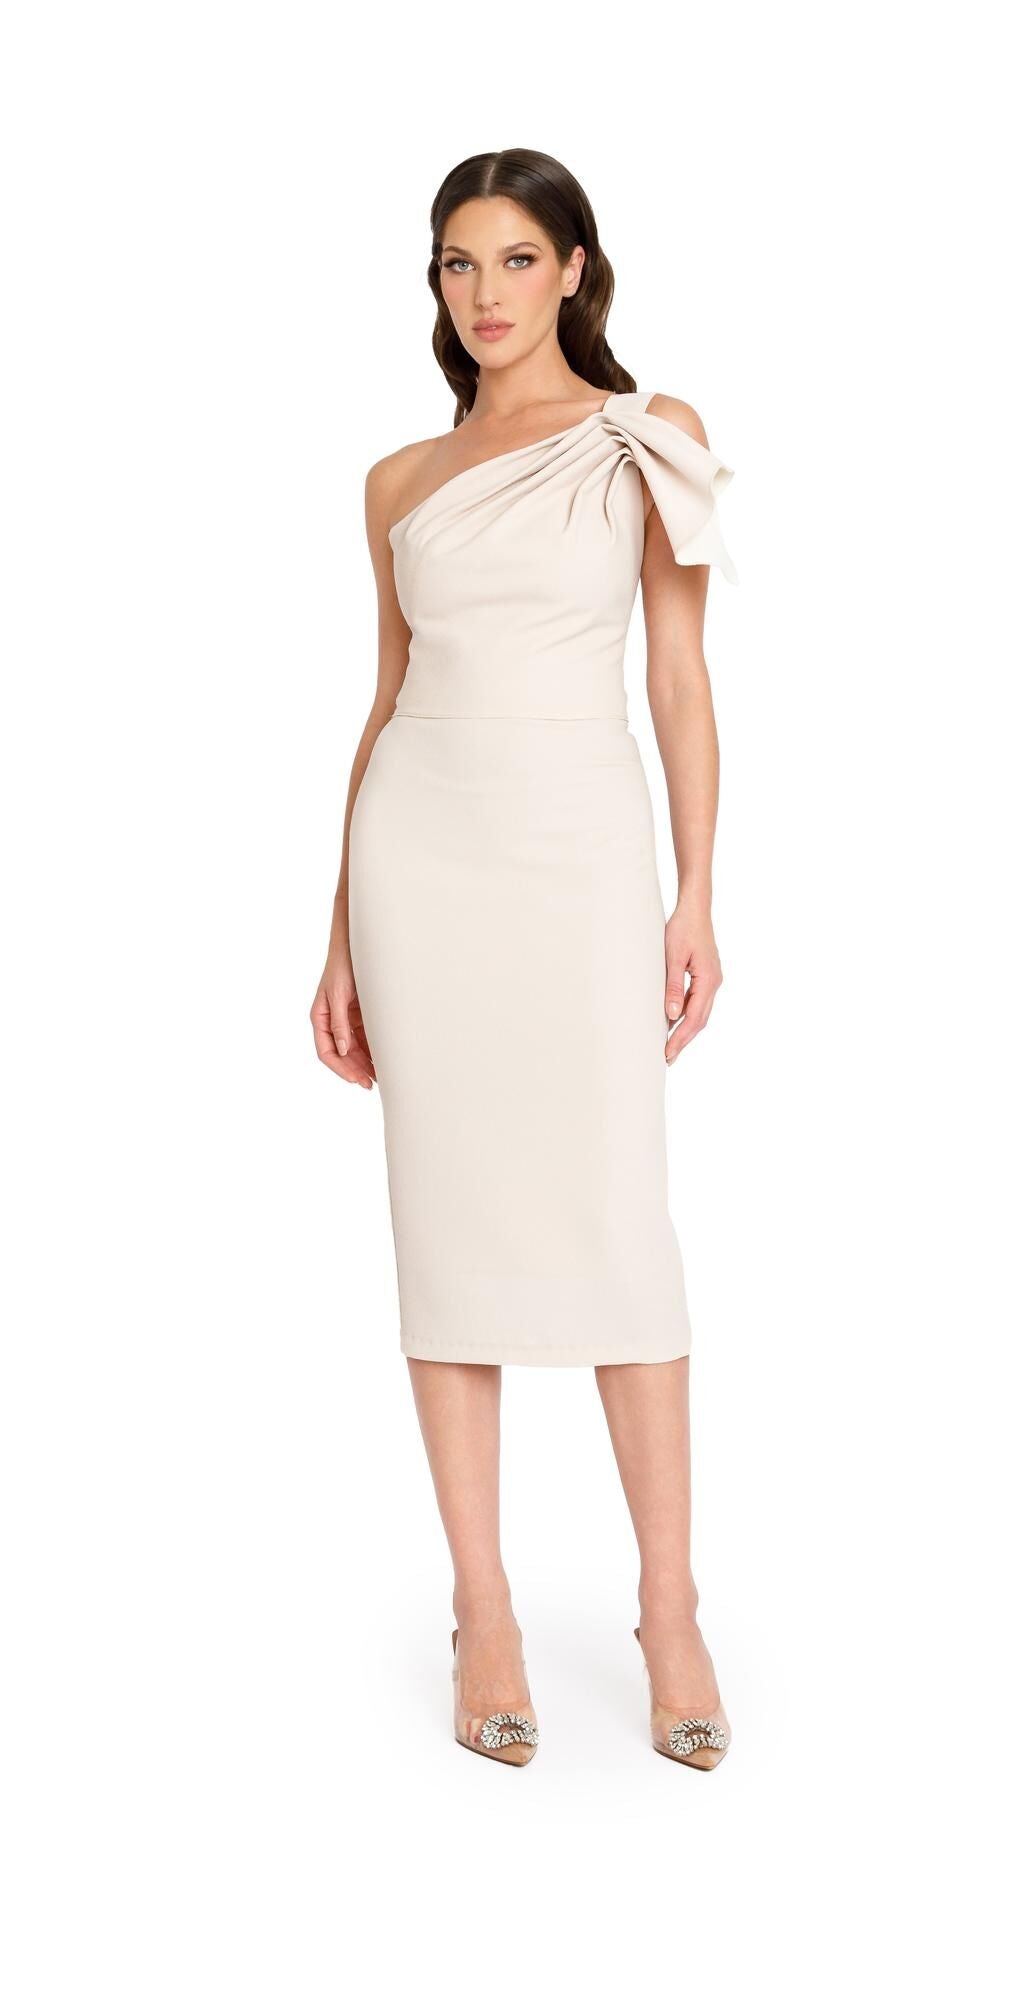 Nicole Bakti 7264 One Shoulder Fluted Sleeve Cocktail Dress - An elegant cocktail dress featuring a one-shoulder design, fluted sleeve, center-back slit, and tea-length silhouette for timeless sophistication.